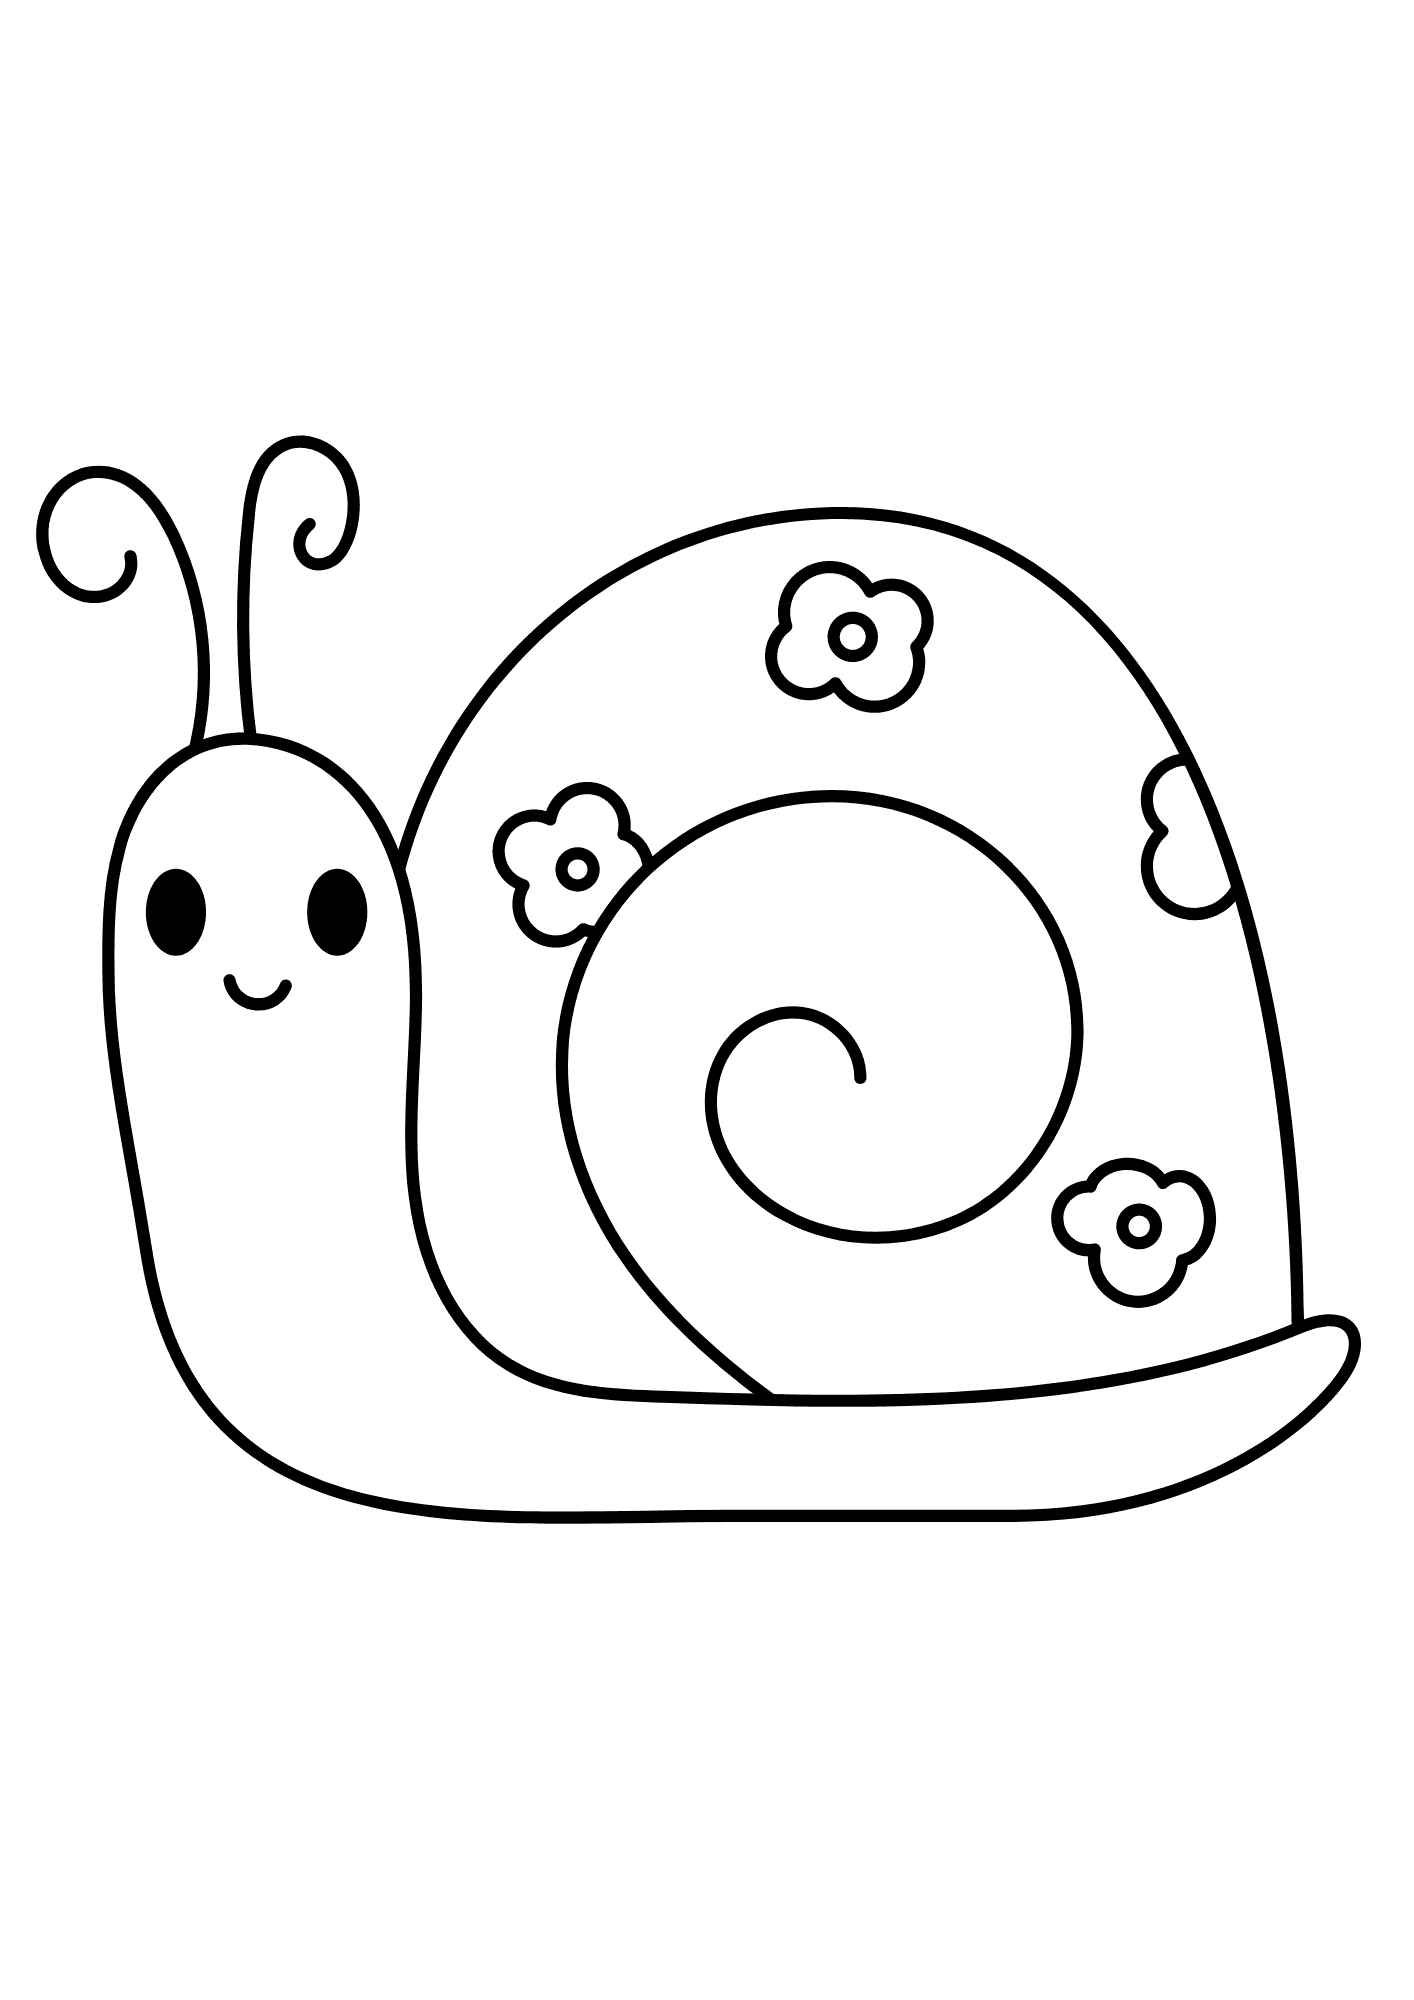 Snail Printable For Children Coloring Pages